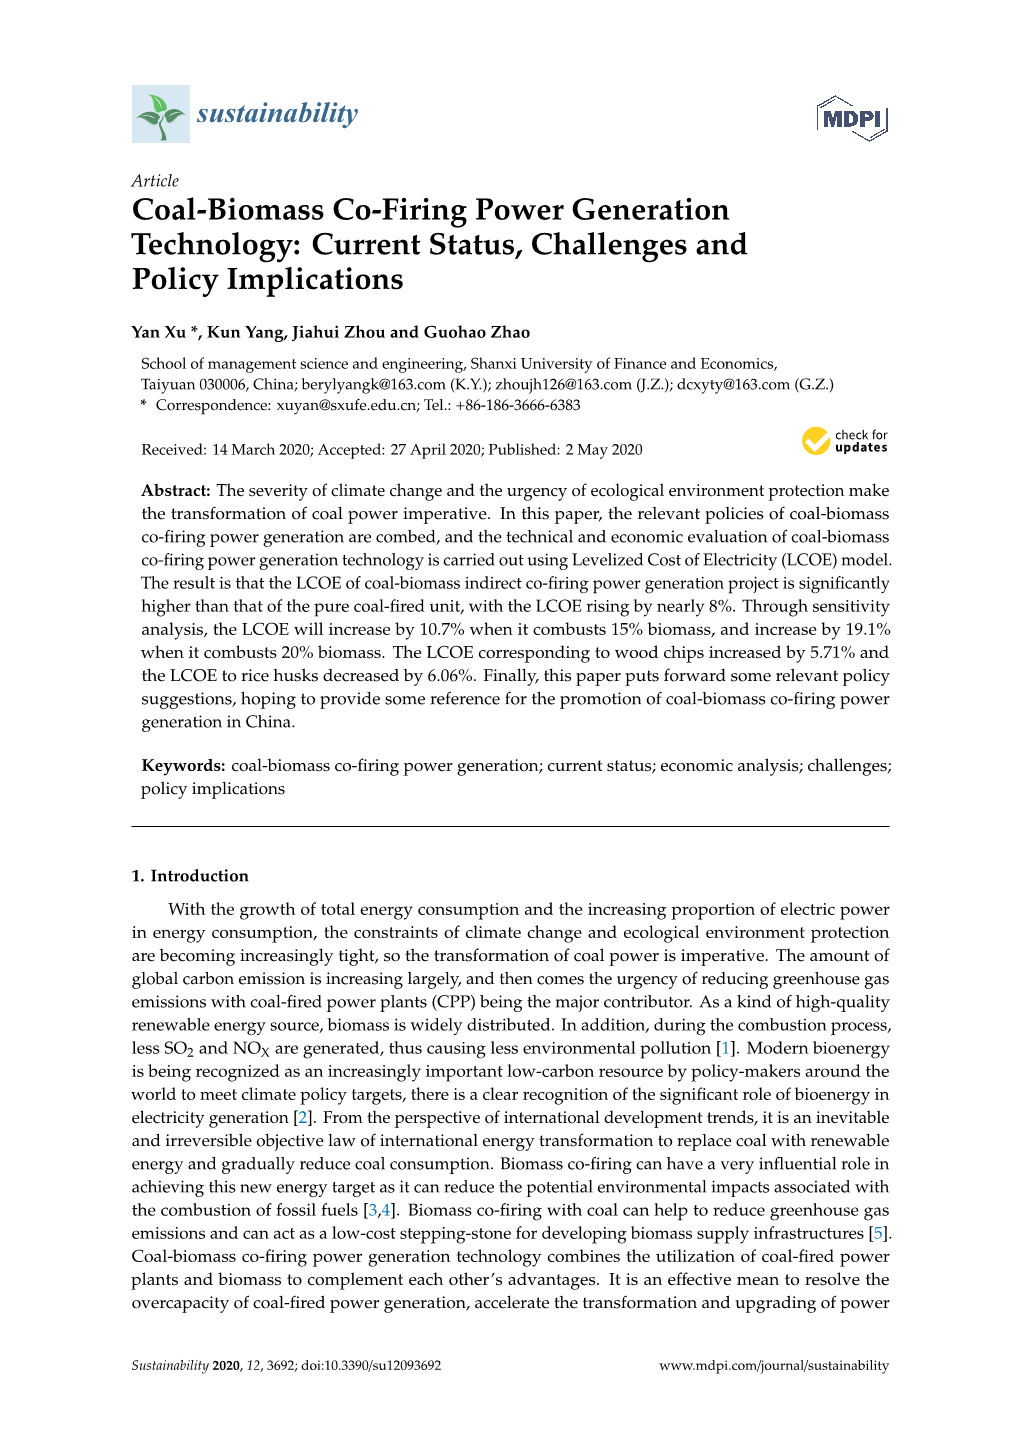 Coal-Biomass Co-Firing Power Generation Technology: Current Status, Challenges and Policy Implications